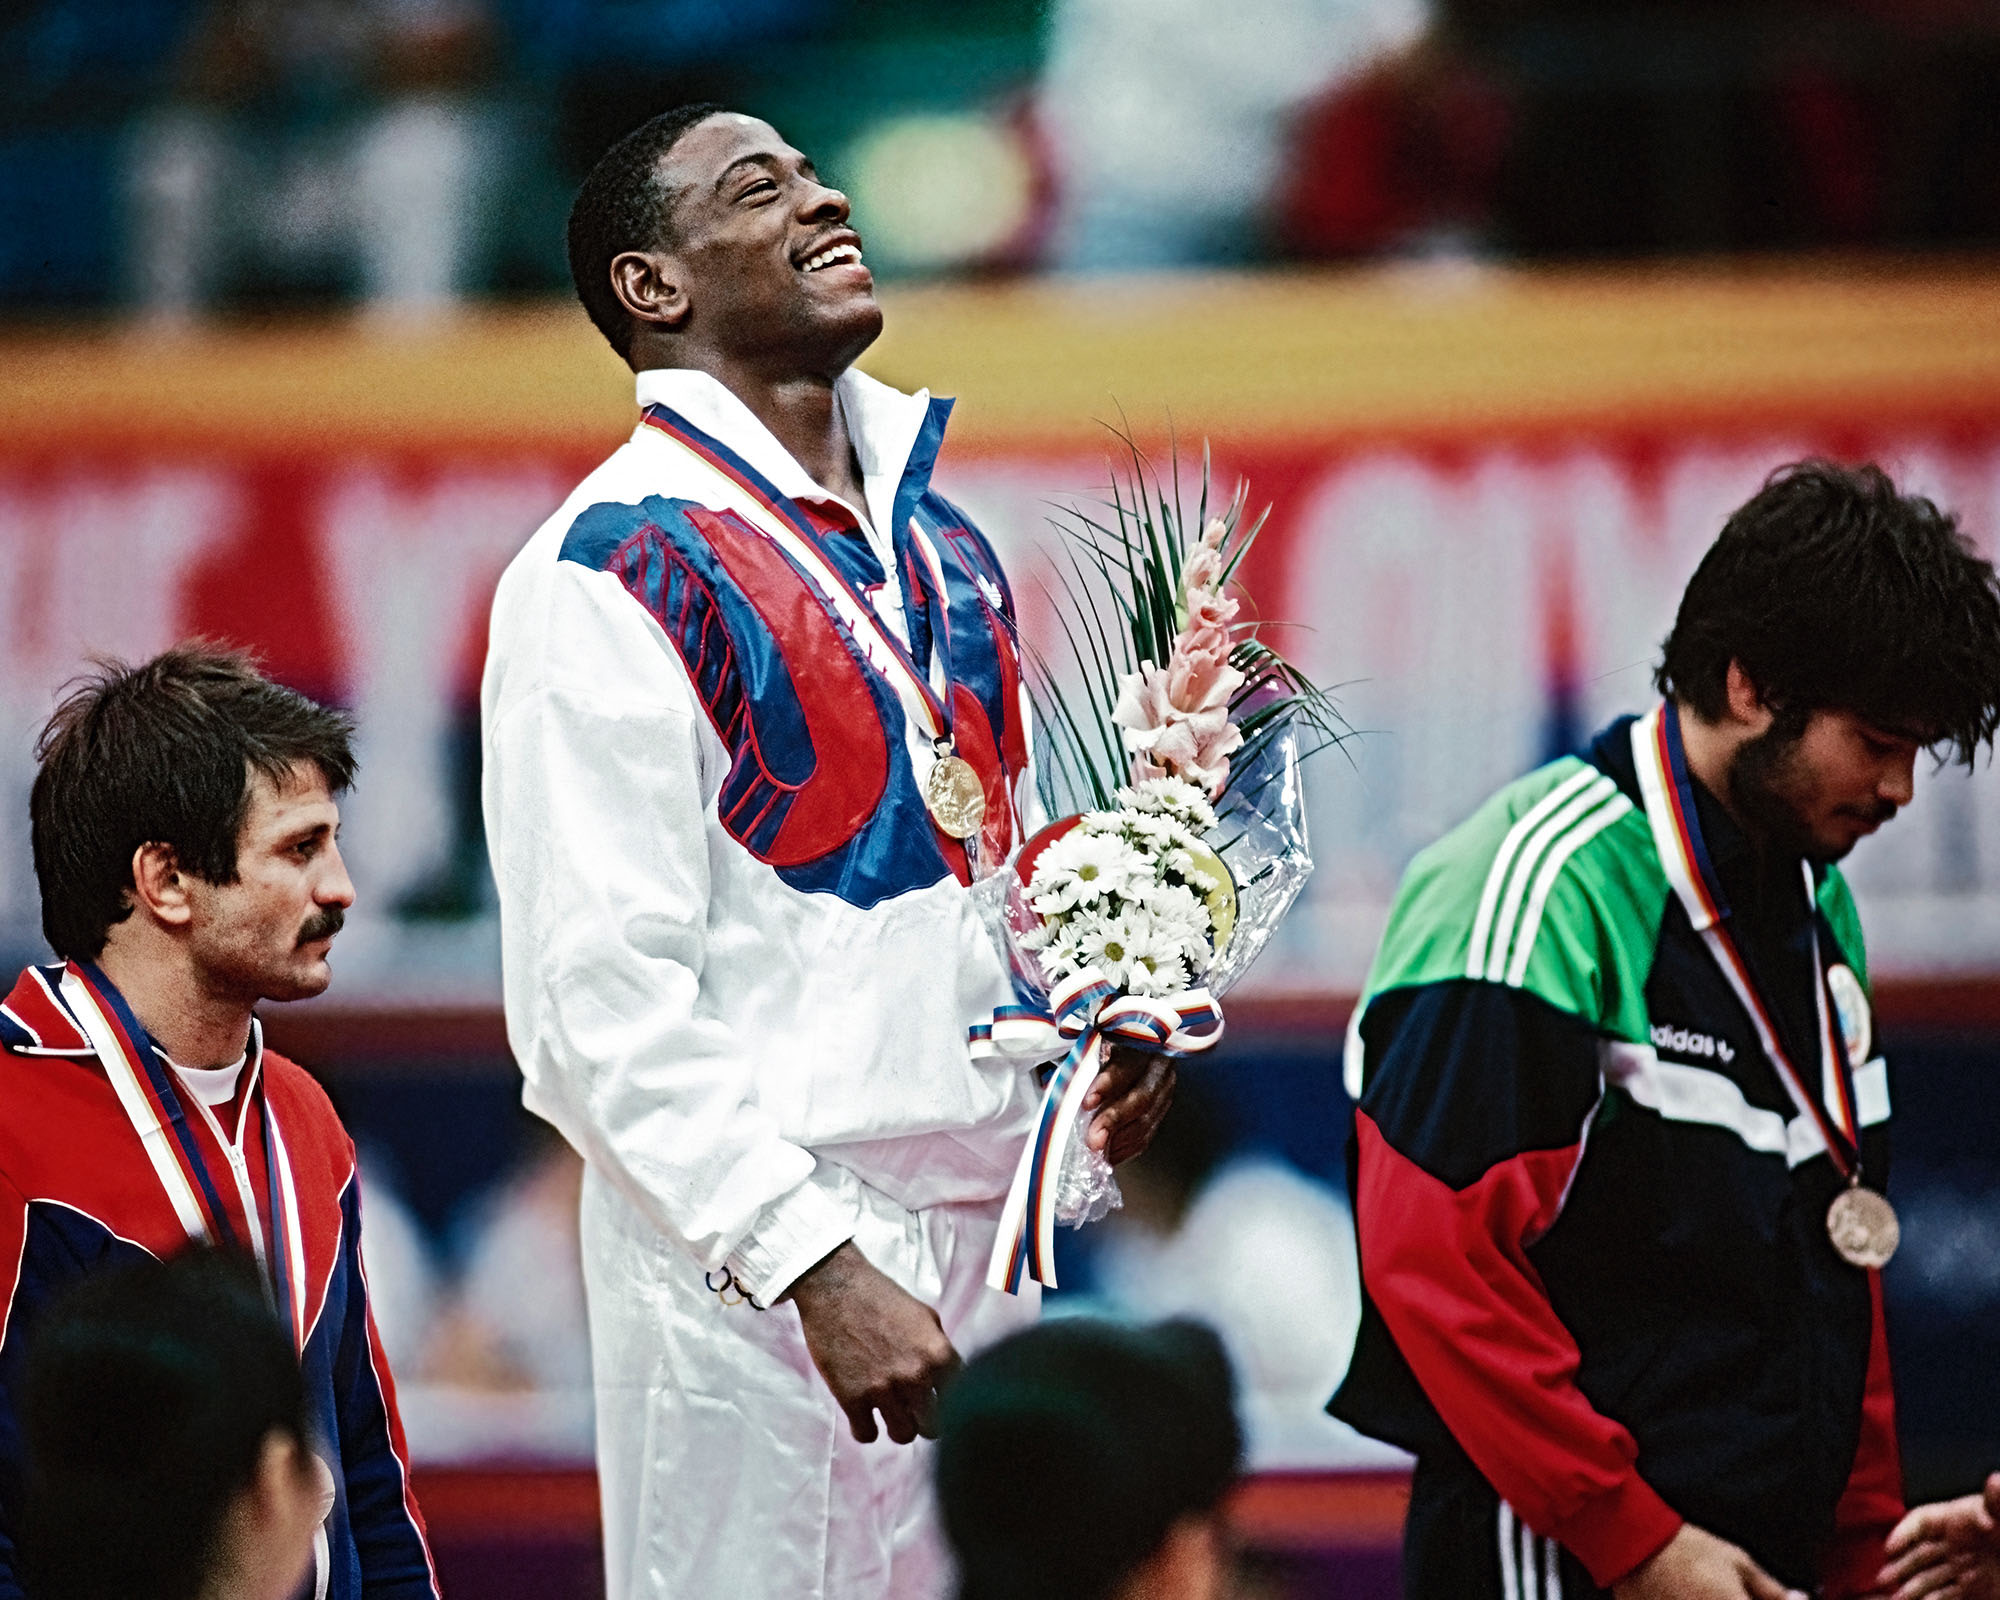 Kenny Monday receiving his olympic medal